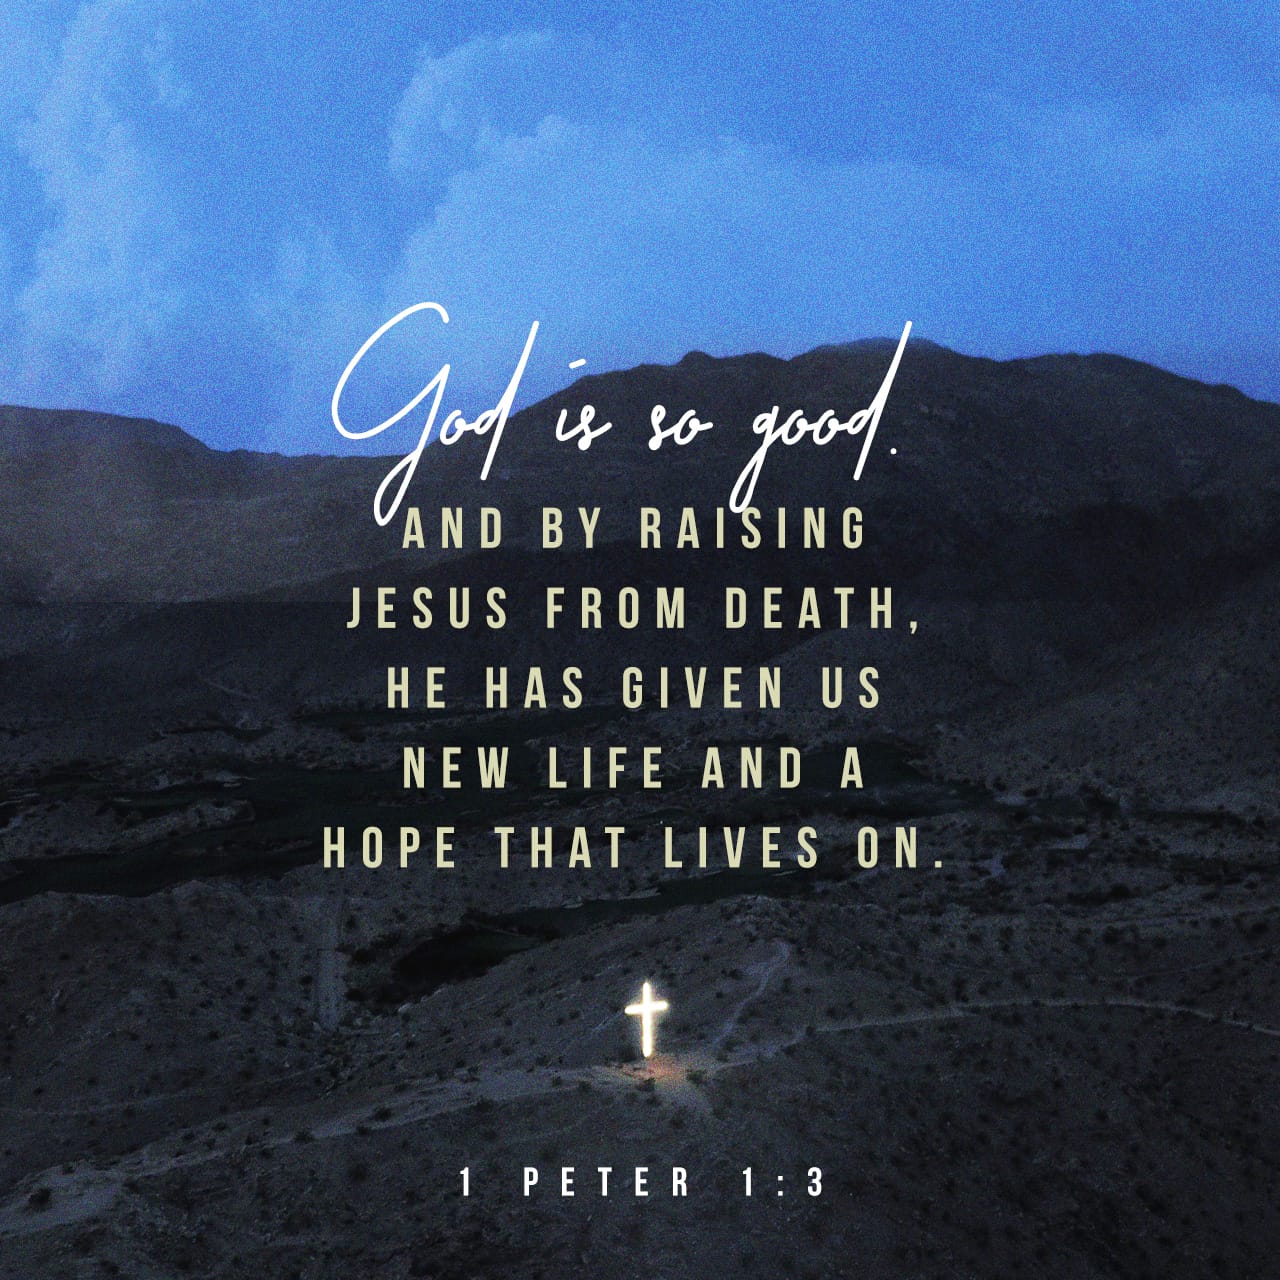 1 Peter 1:3-5 Blessed be the God and Father of our Lord Jesus Christ, which according to his abundant mercy hath begotten us again unto a lively hope by the resurrection of Jesus Christ from the dead, to an inherit | King James Version (KJV) | Download Th